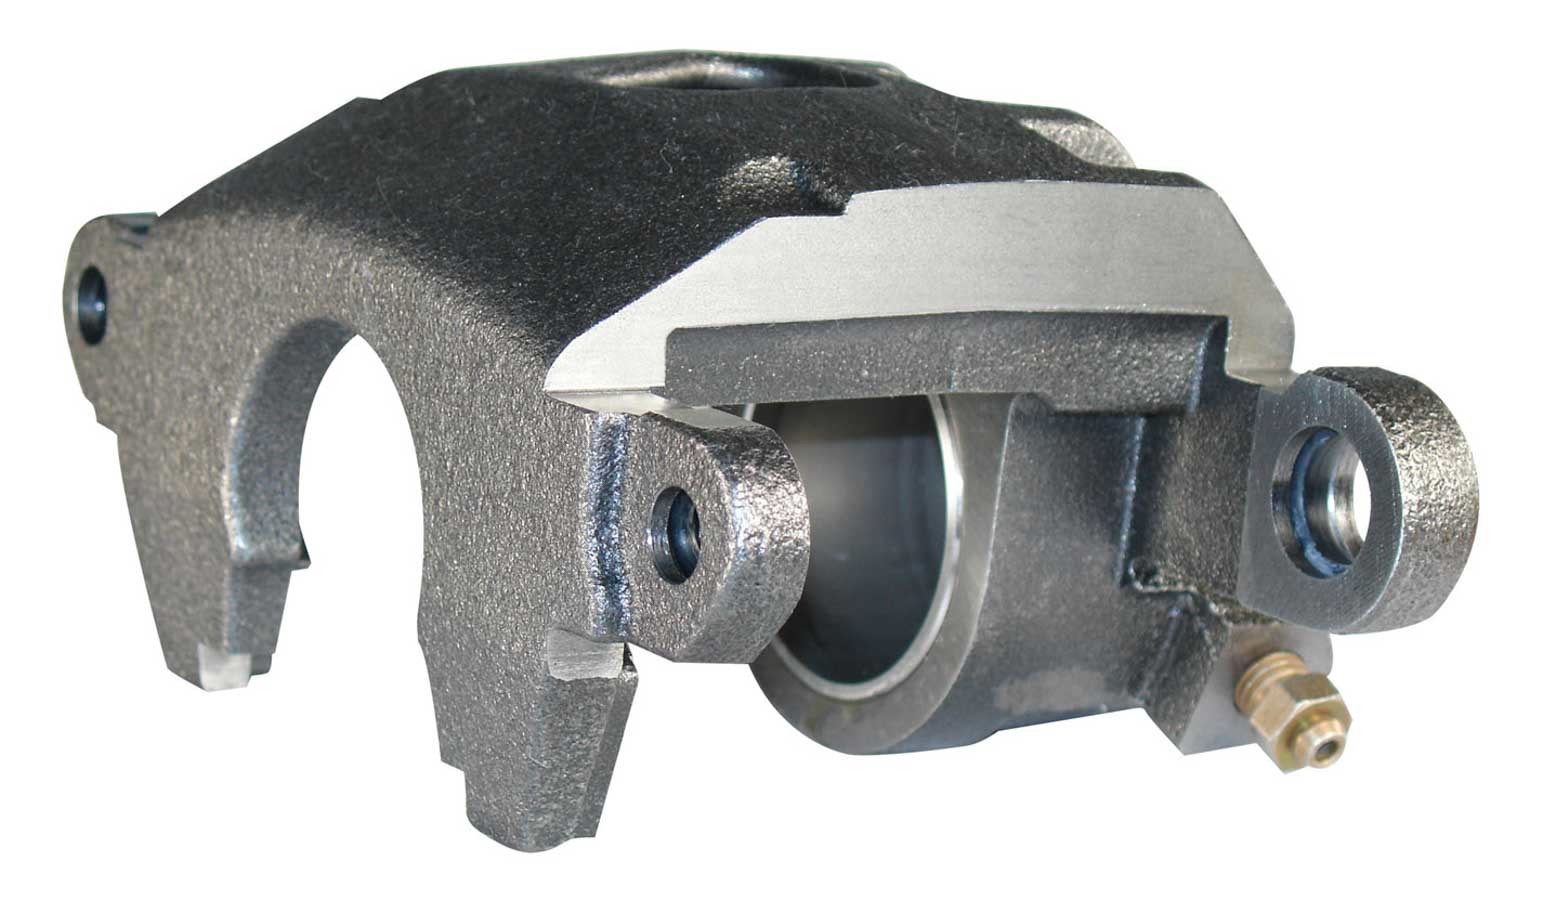 Wilwood 120-8924 Brake Caliper, GM Metric, 1 Piston, Iron, Natural, 11.750 in OD x 1.040 in Thick Rotor, 5.460 in Floating Mount, Each